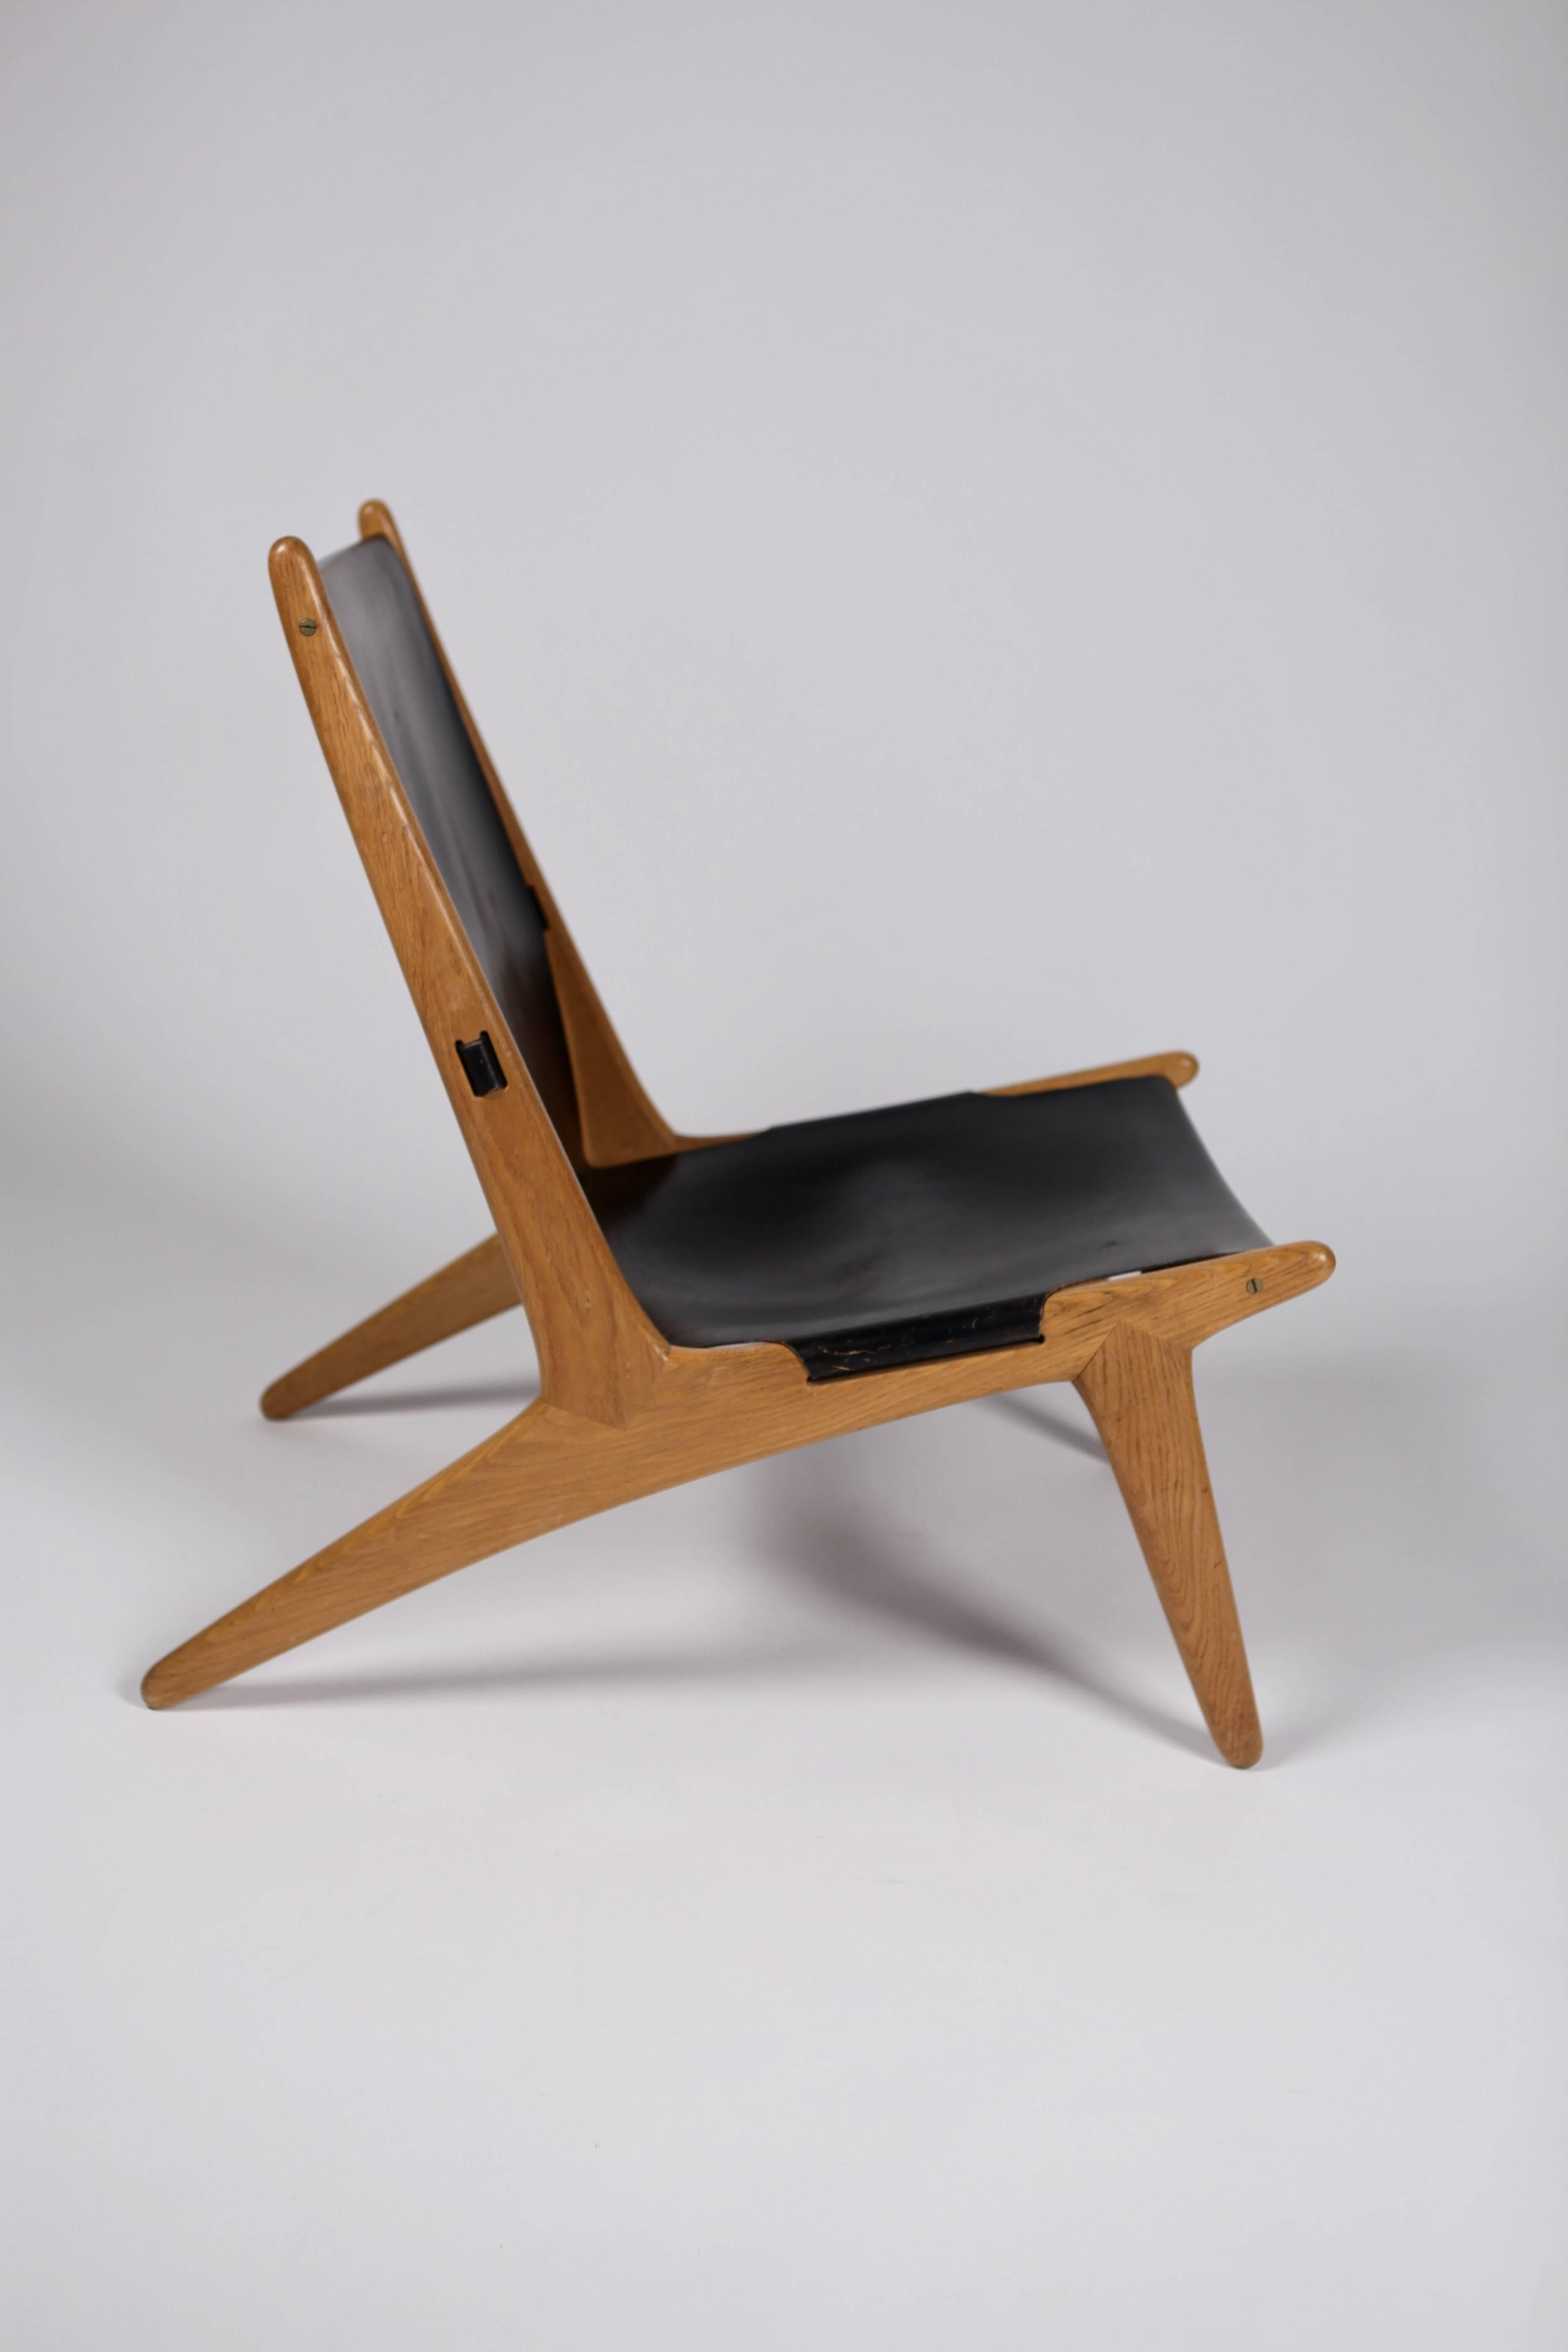 Swedish Hunting Chair by Uno & Östen Kristiansson for Luxus, Sweden, 1954